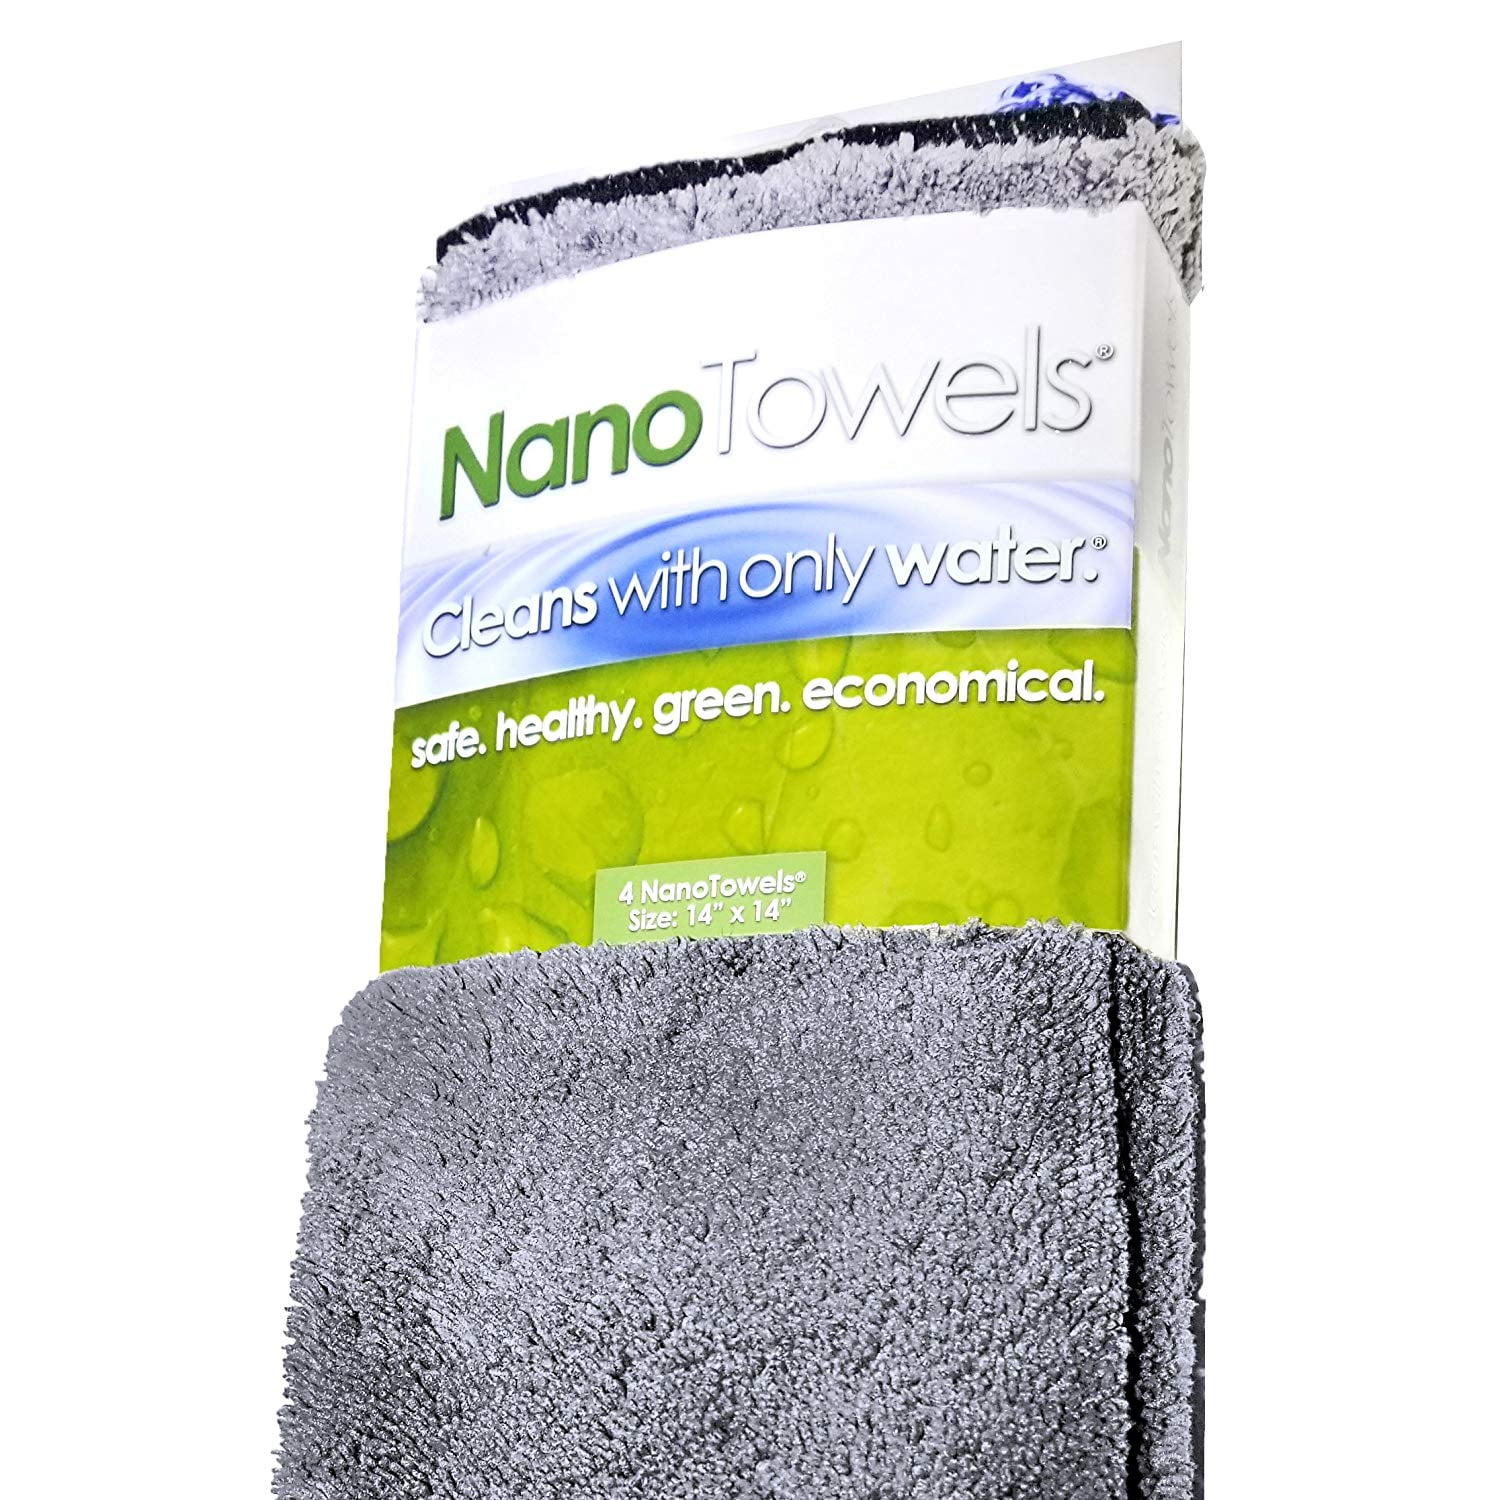 4 NANO Technology Super ultra microfiber cleaning cloth Best absorbent 14x14" 